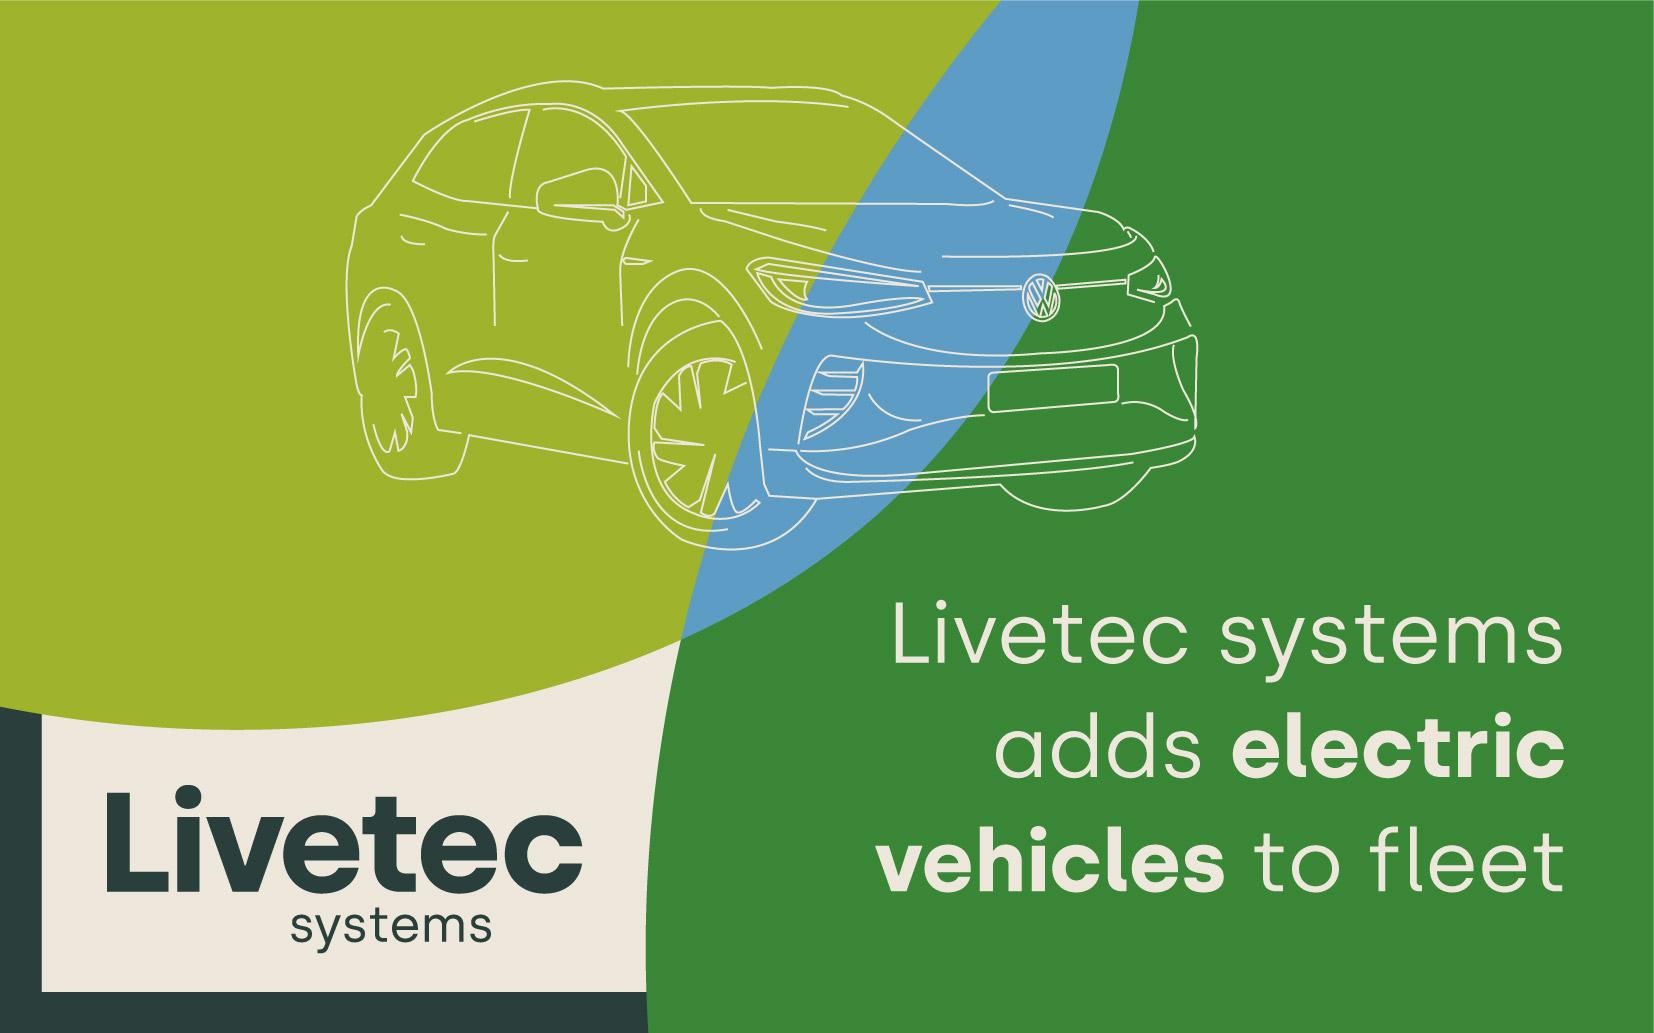 Livetec Systems adds electric vehicles to fleet